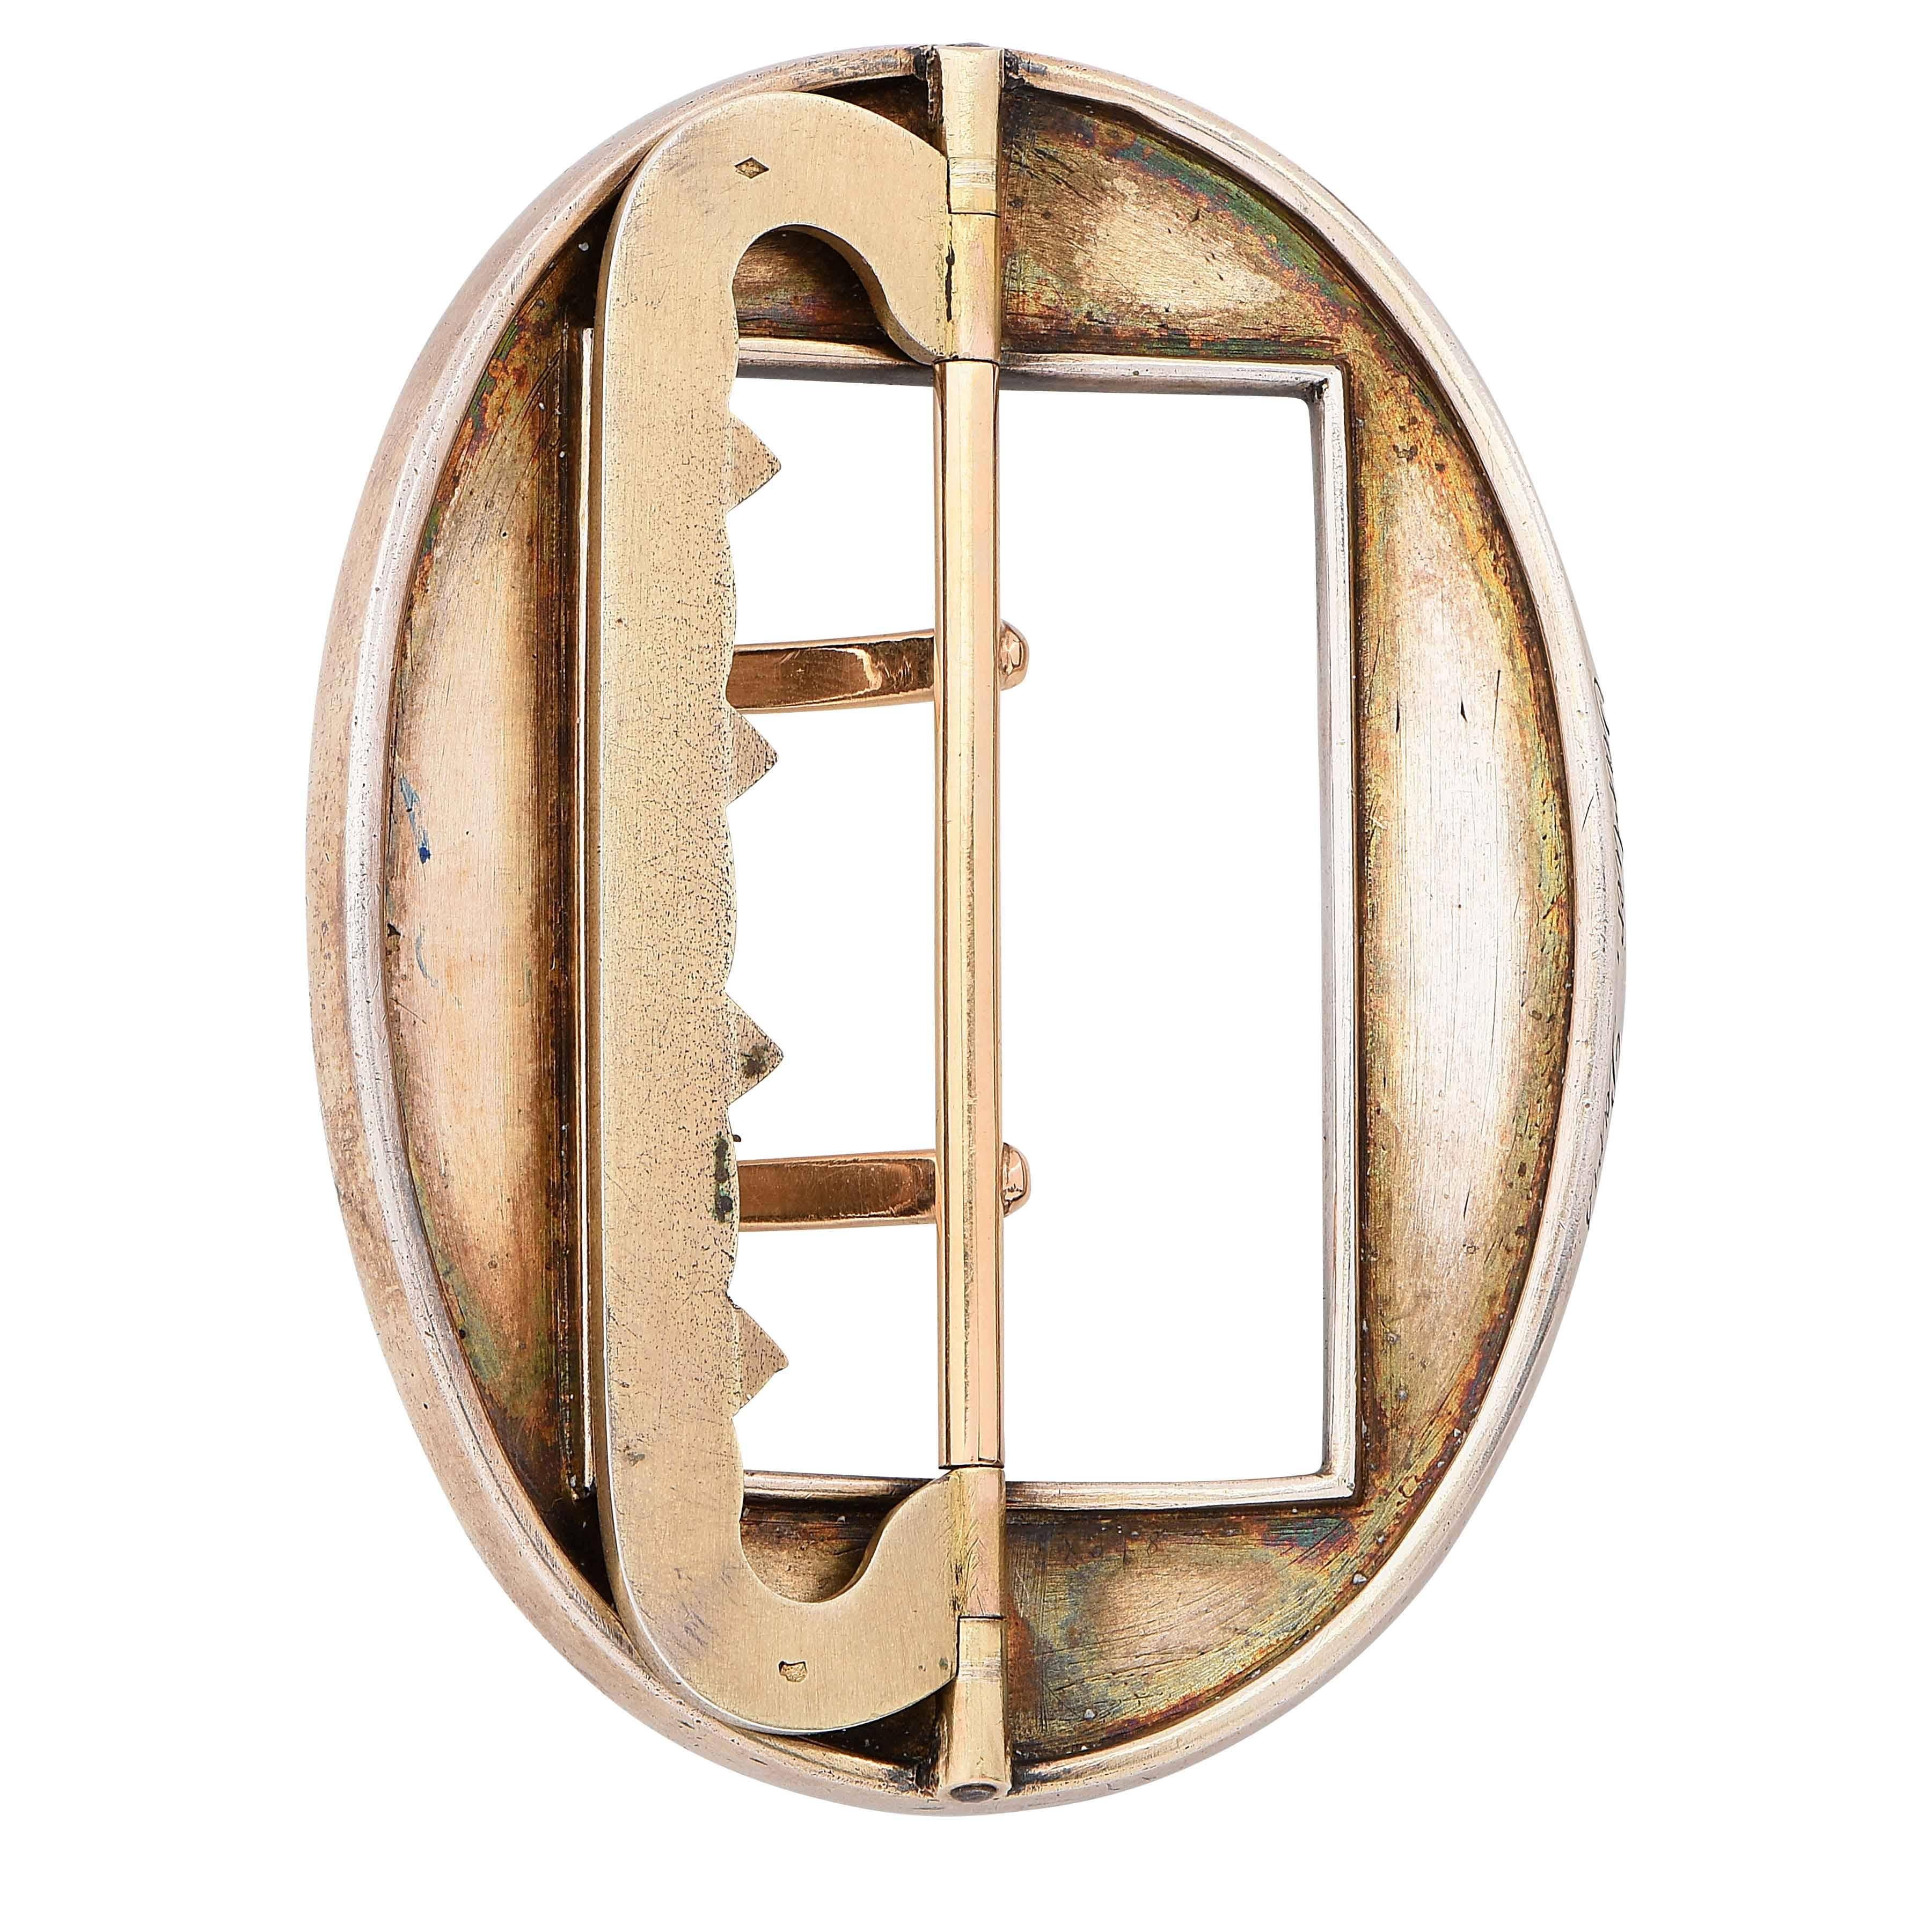 This wonderful enamel buckle by Cartier, Paris features meticulous attention to detail in its very fine enamel work.
Dating from around 1890 this 18 karat yellow and rose gold beauty is from the Anne R Lichtblau Collection and is numbered